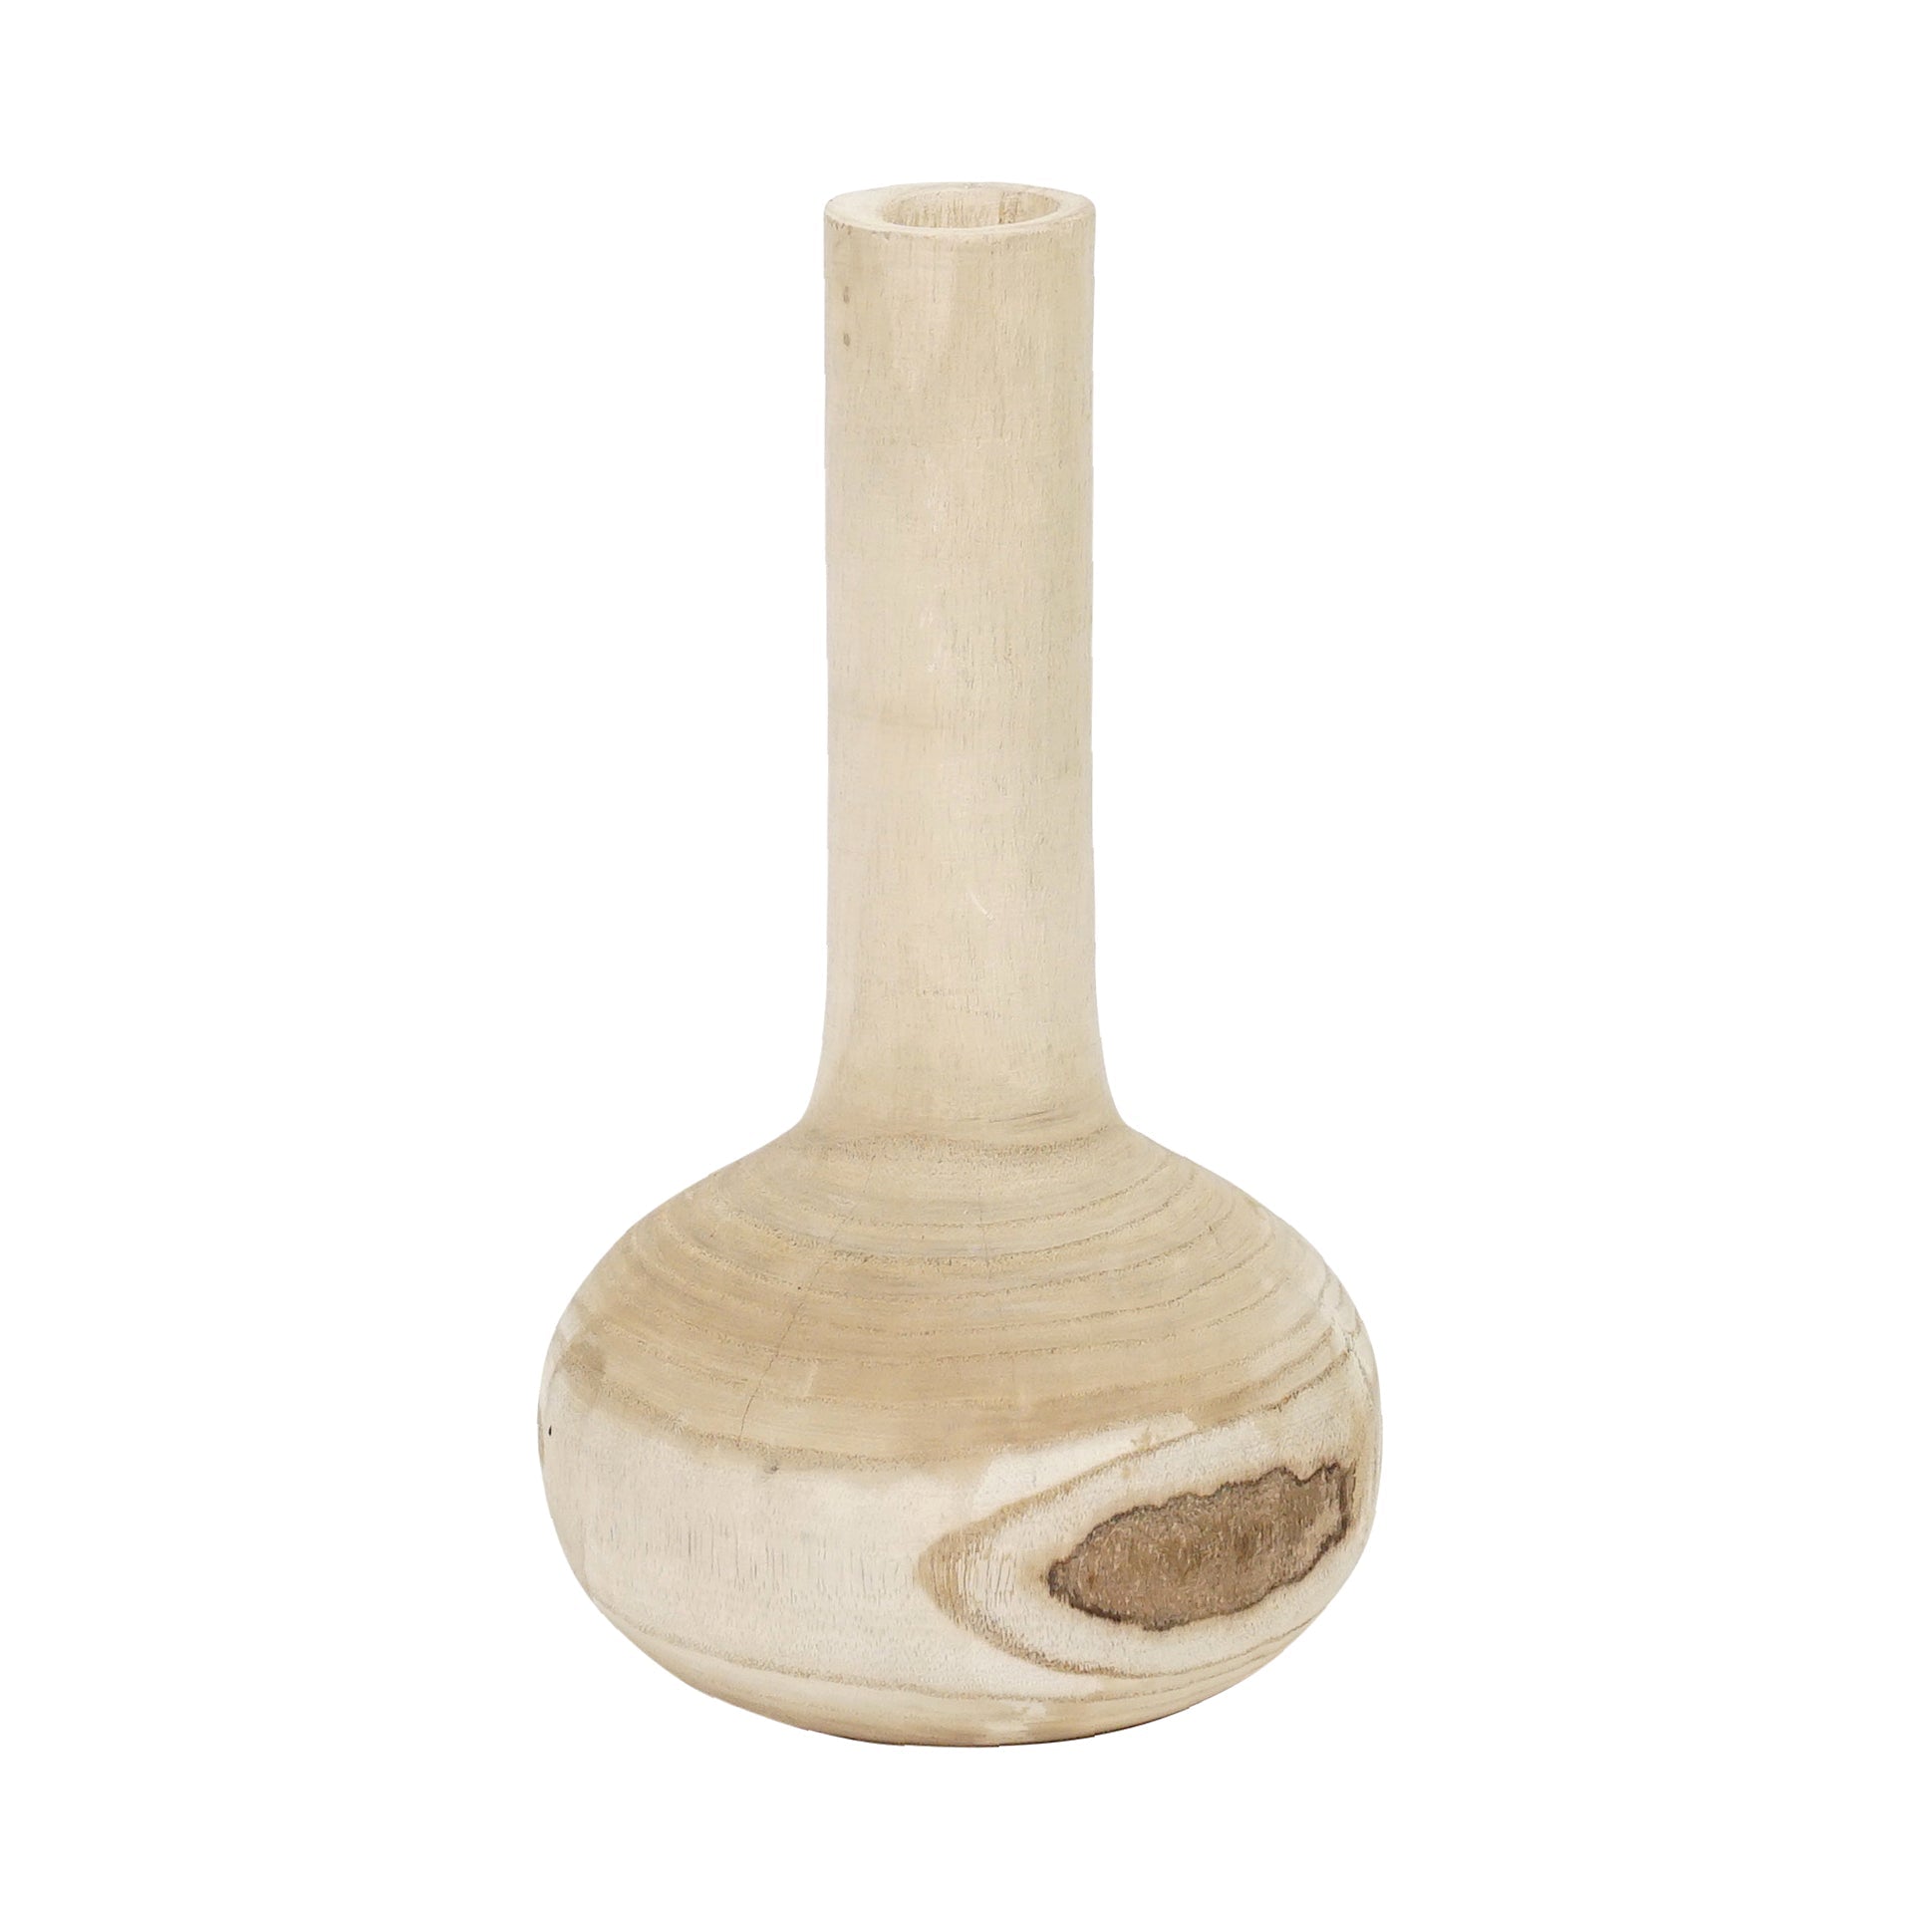 https://cdn.shopify.com/s/files/1/0074/8175/3667/products/Anaheim-Timber-Natural-Bottle-Wide-Pure-Homewares.jpg?v=1646642233&width=1939